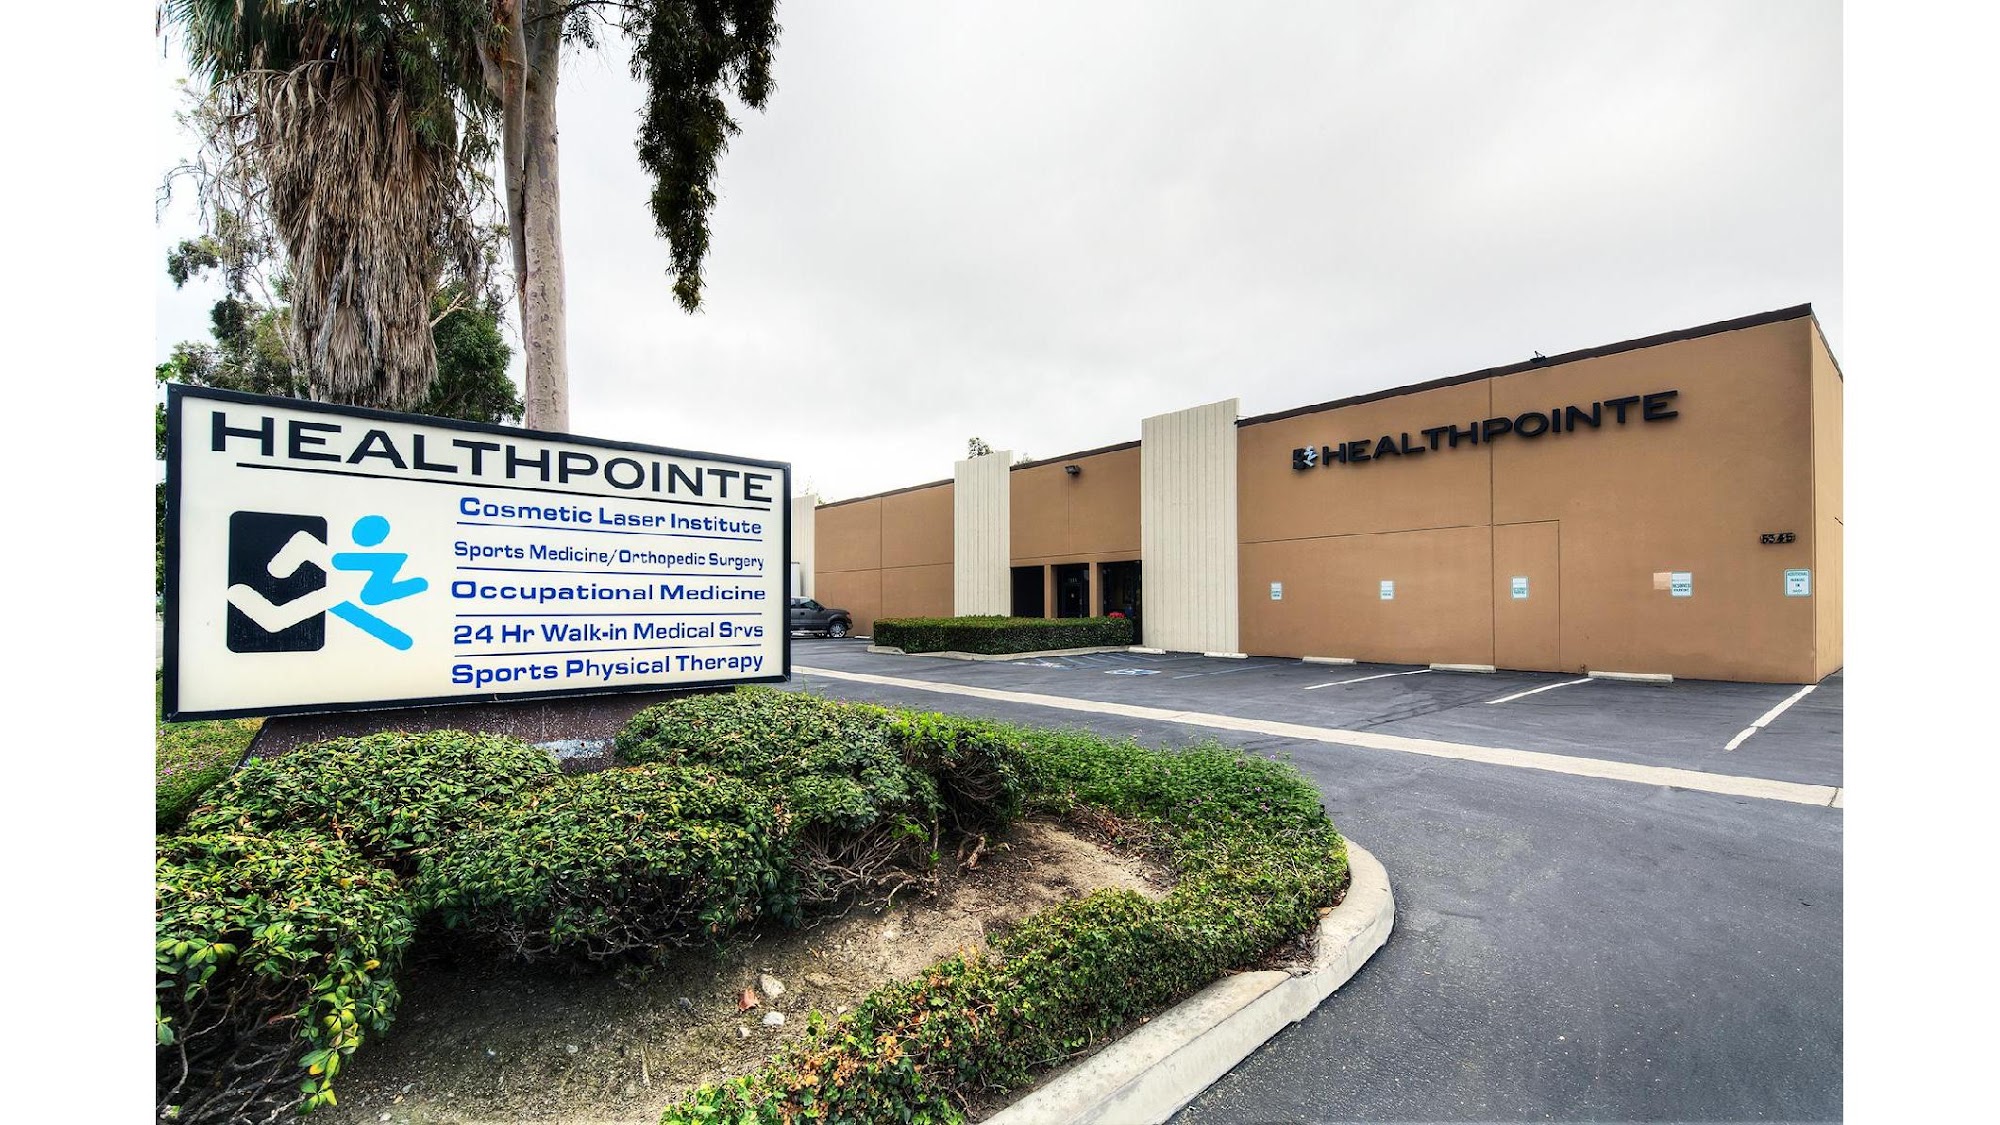 Healthpointe Irwindale